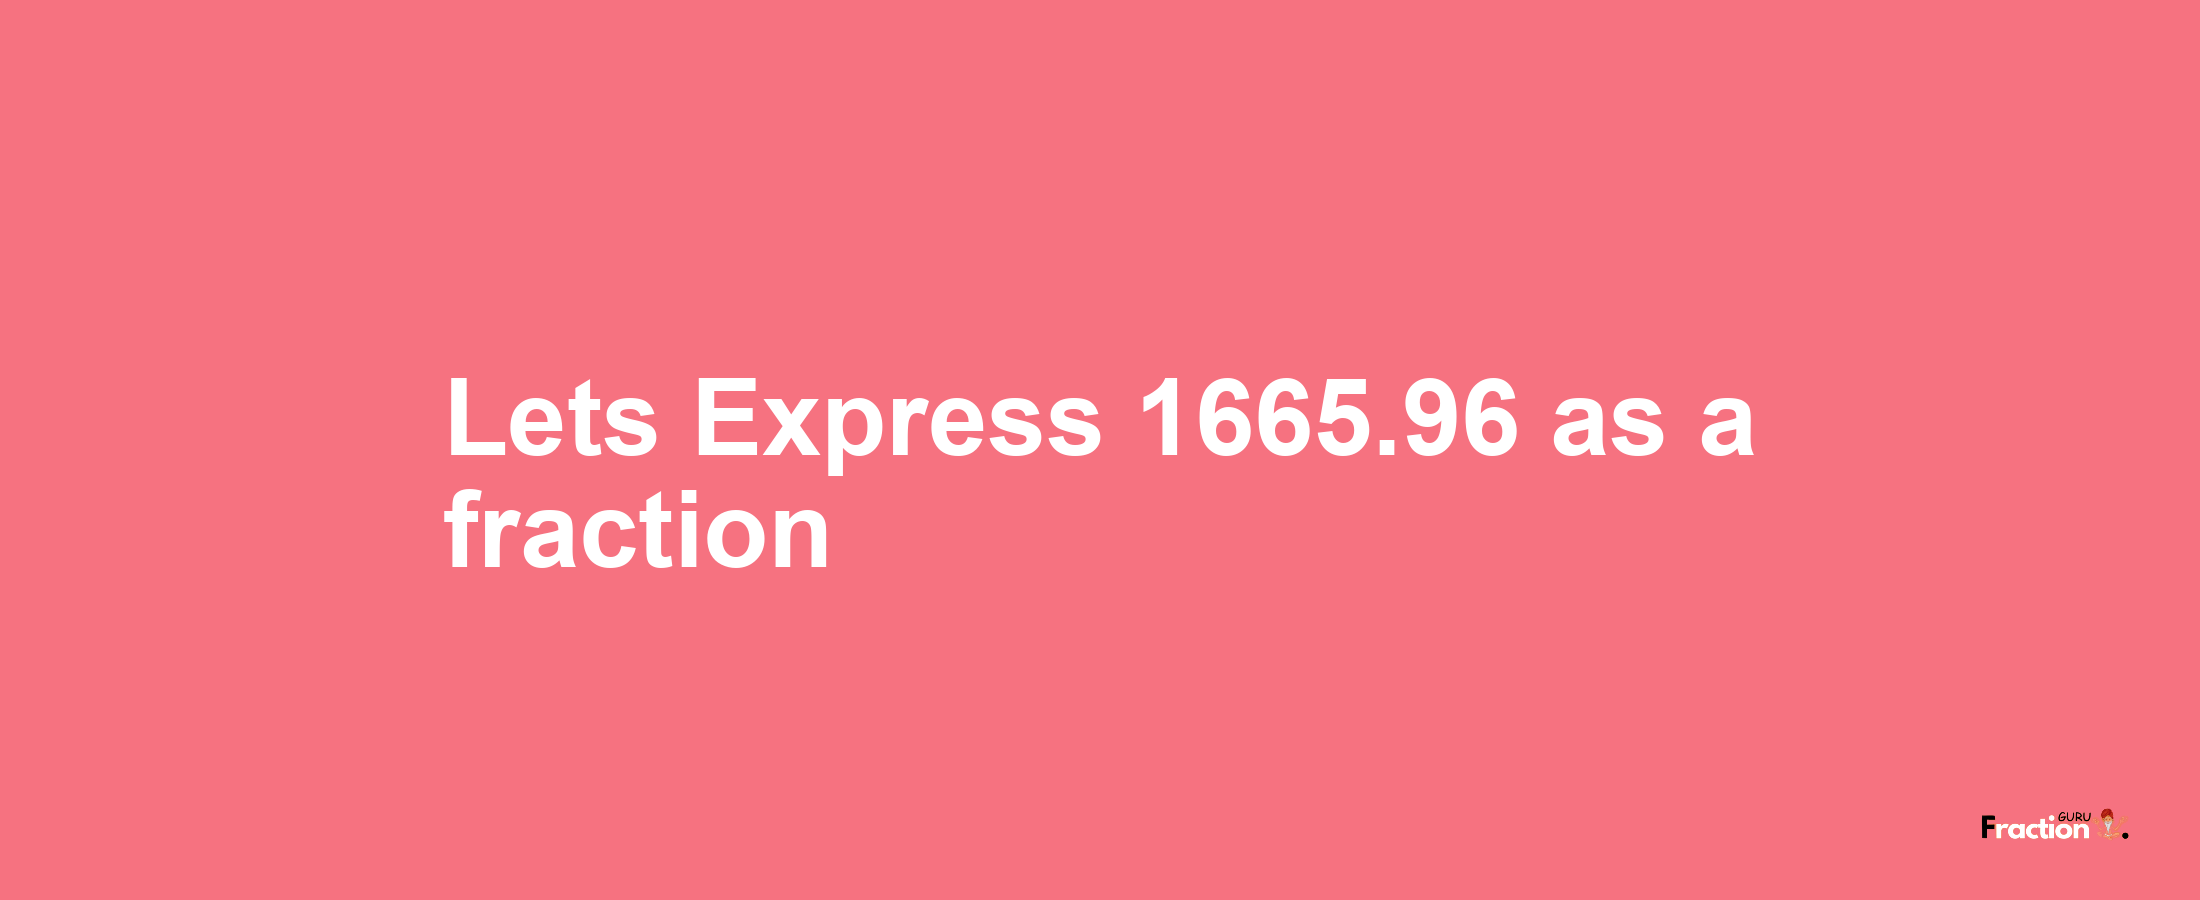 Lets Express 1665.96 as afraction